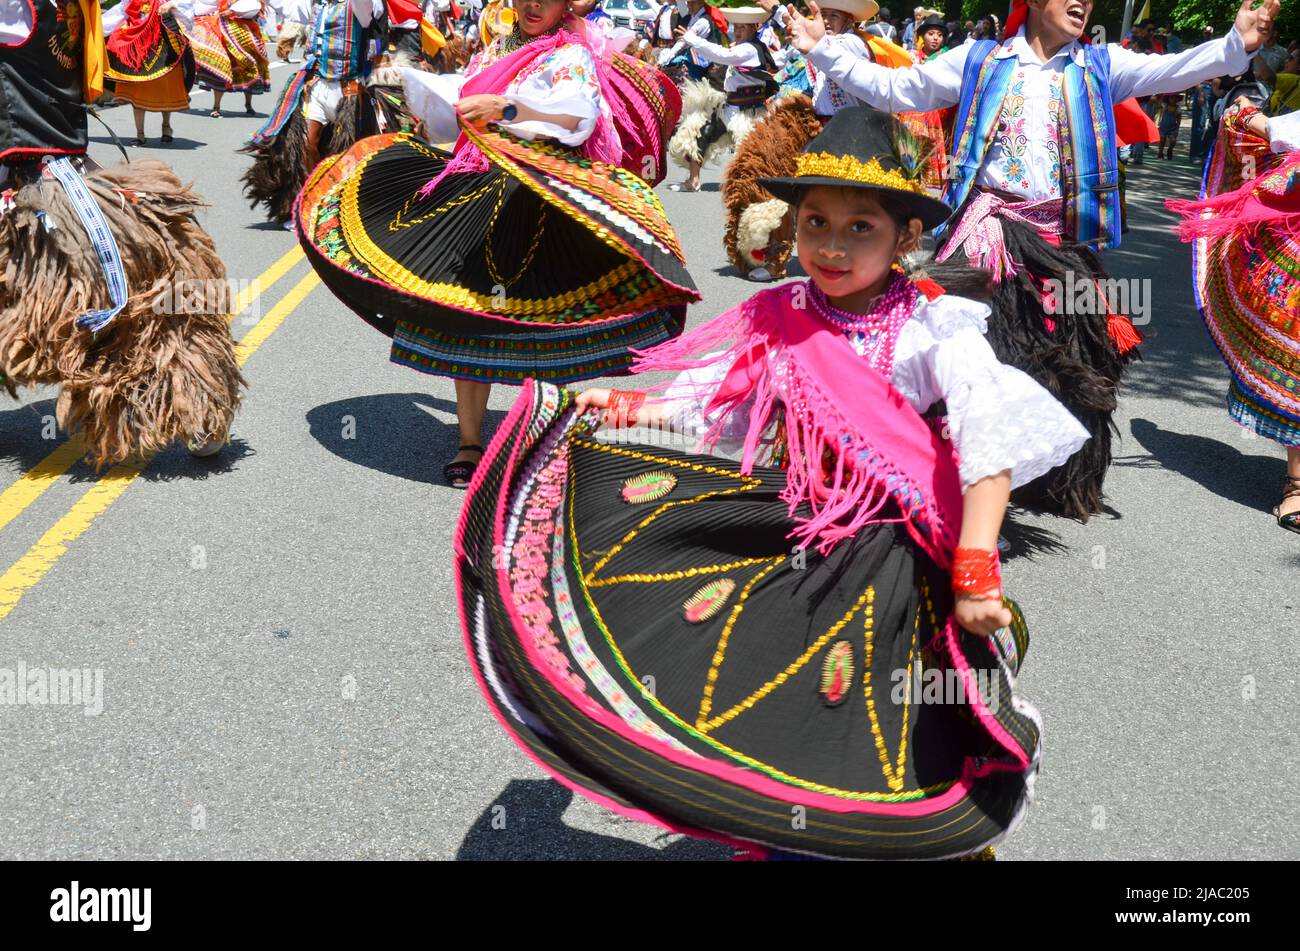 Girls are seen dancing with traditional Ecuadorian outfits during the Ecuadorian Independence Day Parade in New York City on May 29, 2022. Stock Photo